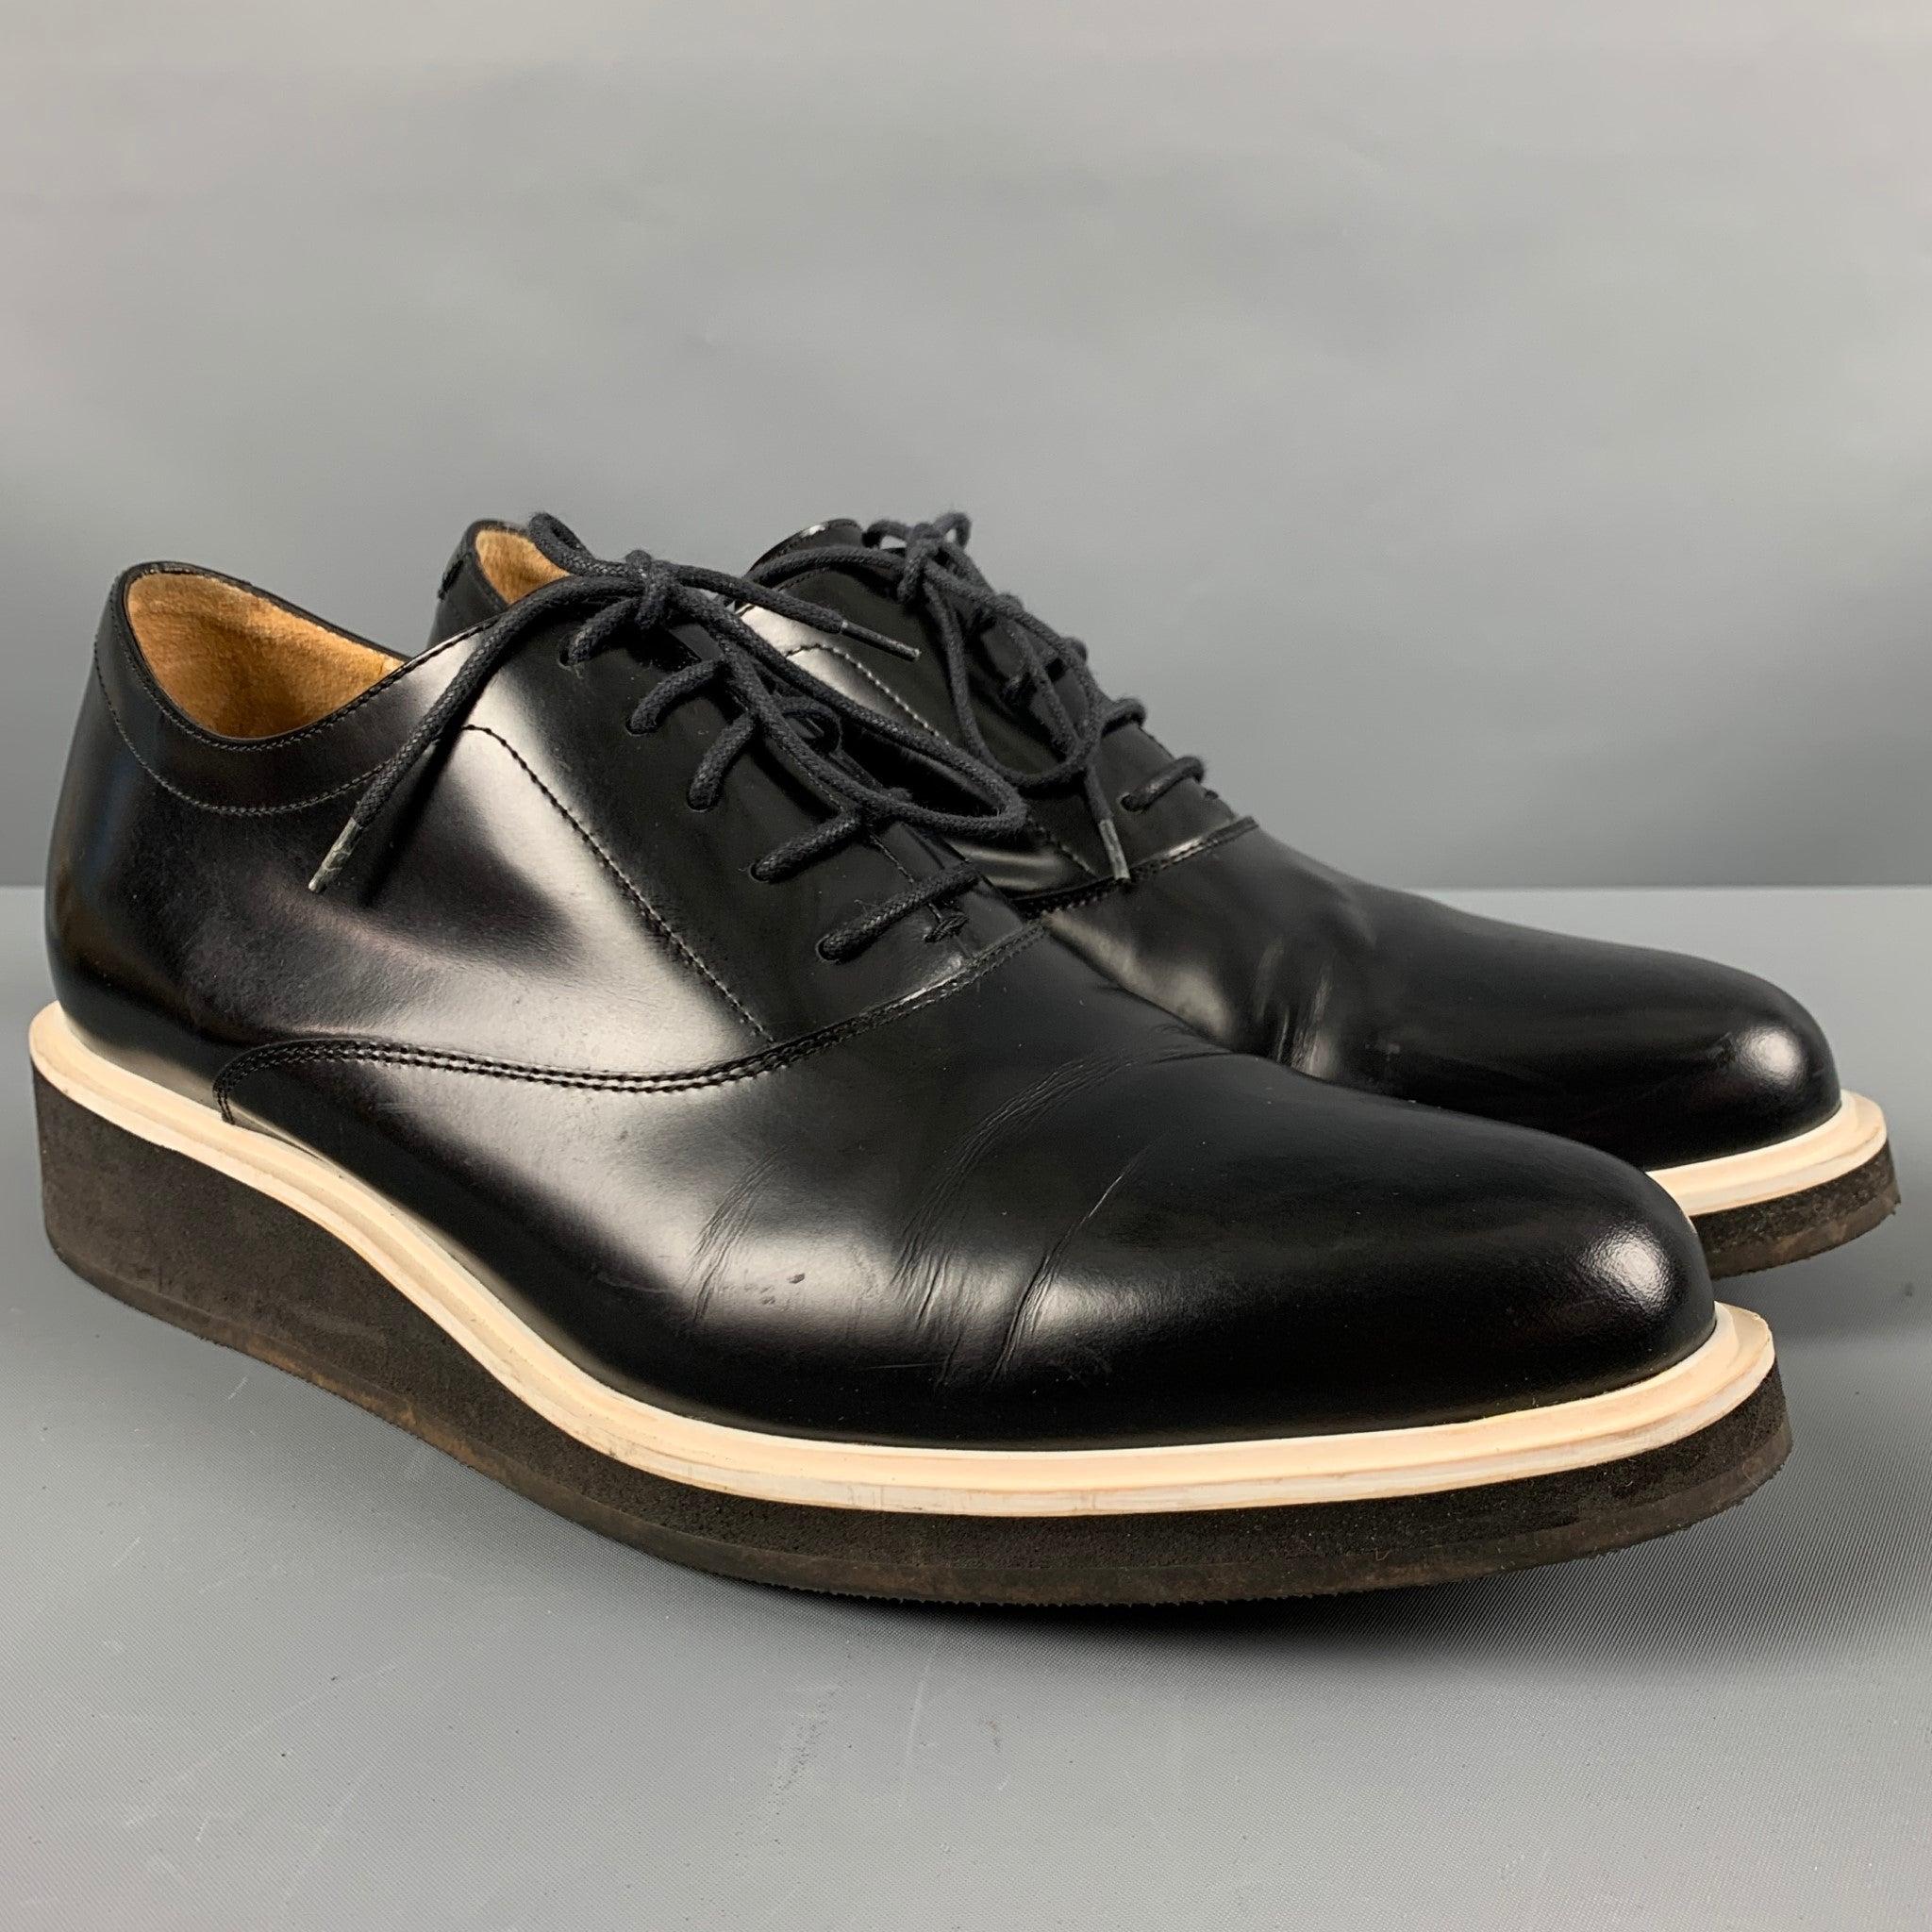 3.1 PHILLIP LIM
lace up shoes in a black leather featuring featuring a platform style and white trim.Very Good Pre-Owned Condition. Minor signs of wear. 

Marked:   SHS2-0425DRLM 43Outsole:12.5 inches  x 4.5 inches  
  
  
 
Reference: